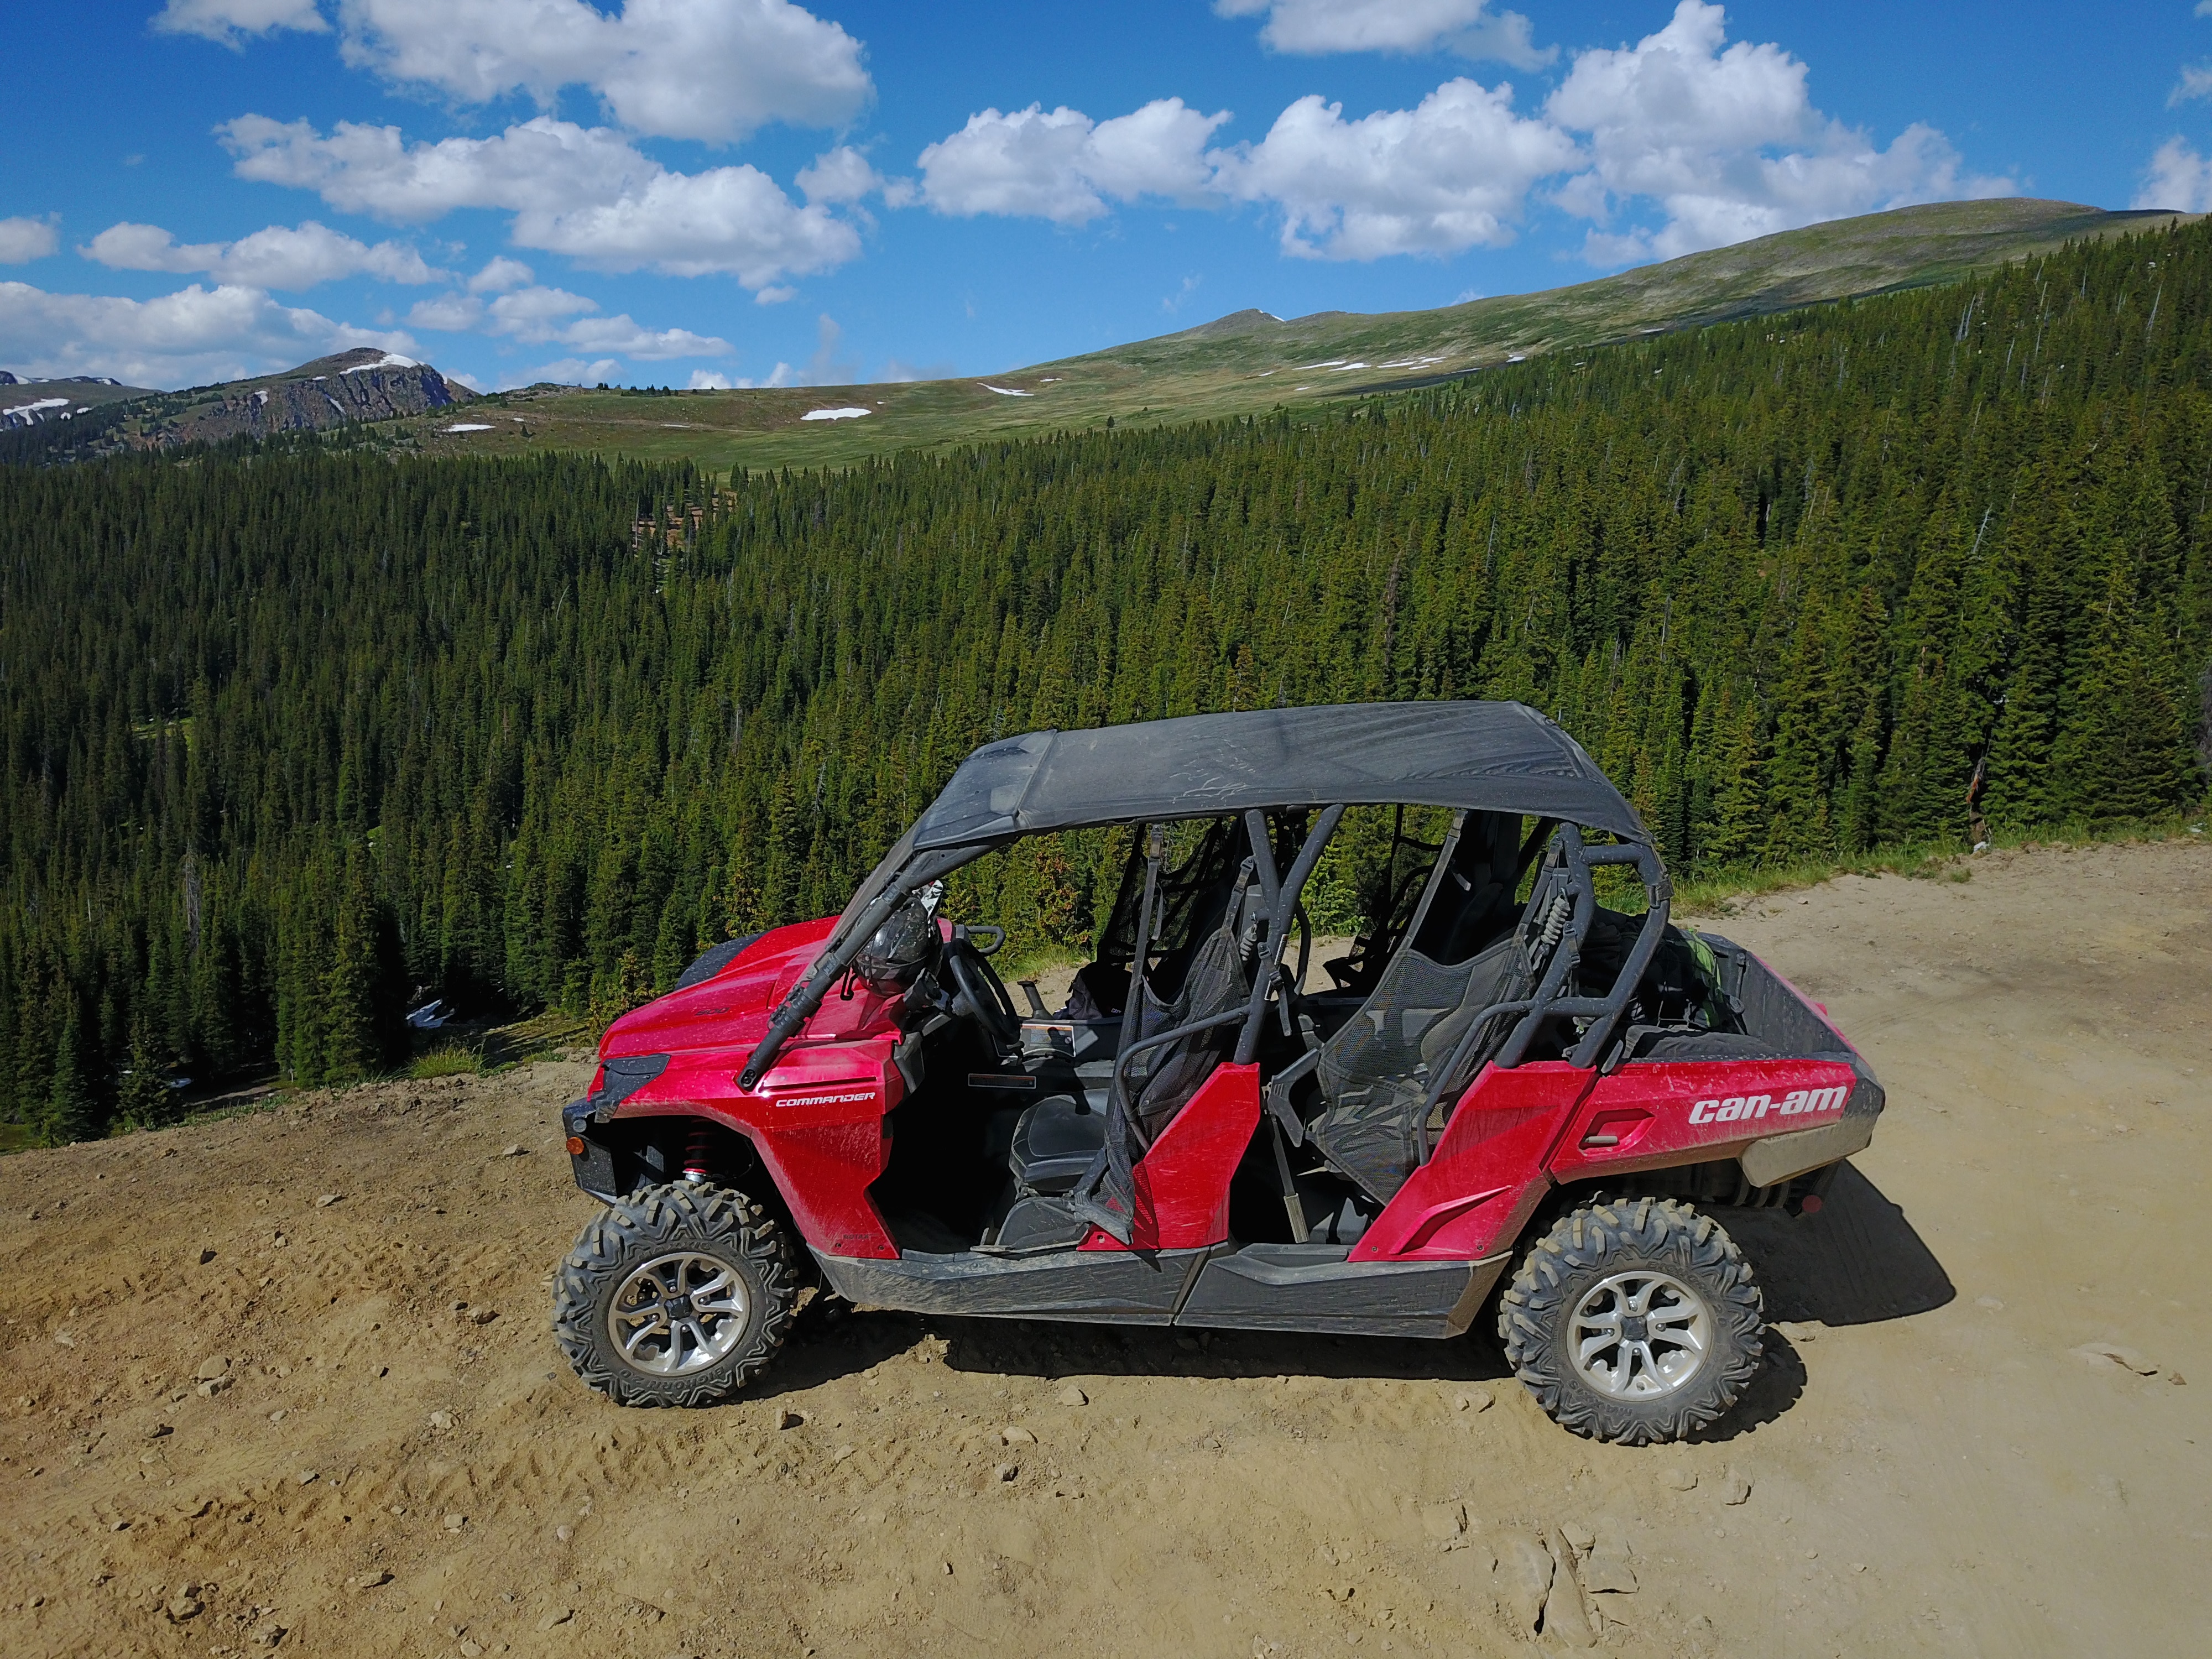 A red Can-Am unit parked with mountains and trees in the background